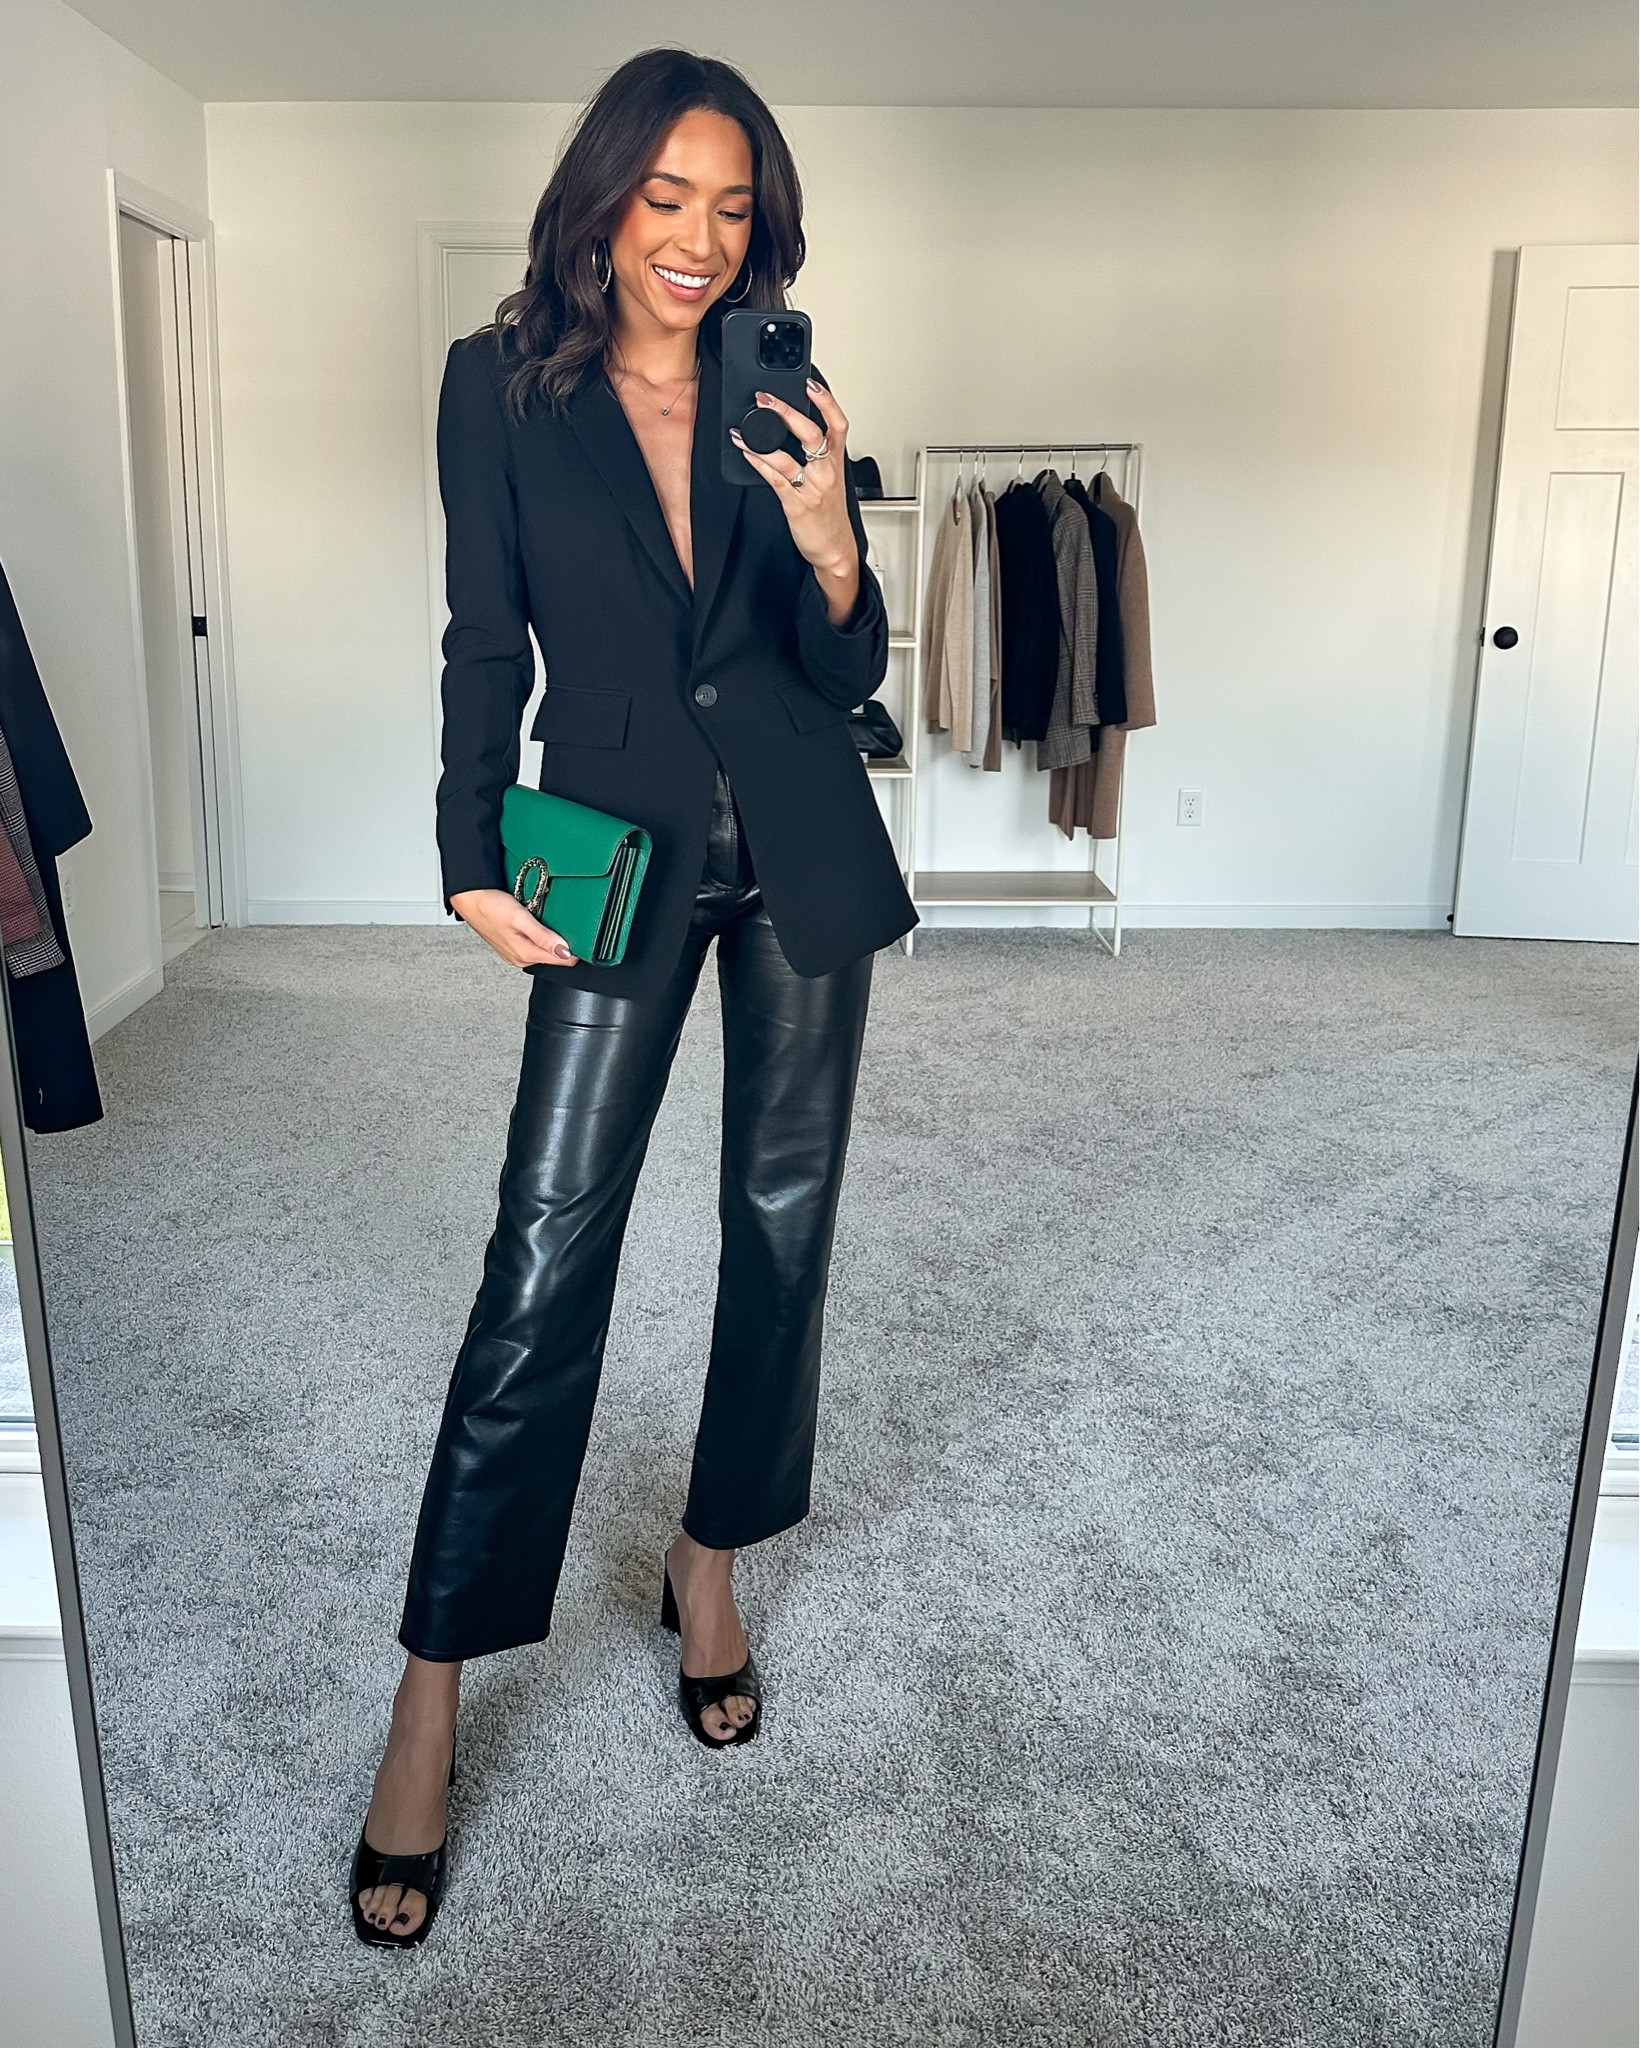 Let's chat midsize fall outfits for work. I love leather pants or trou, mid size outfits